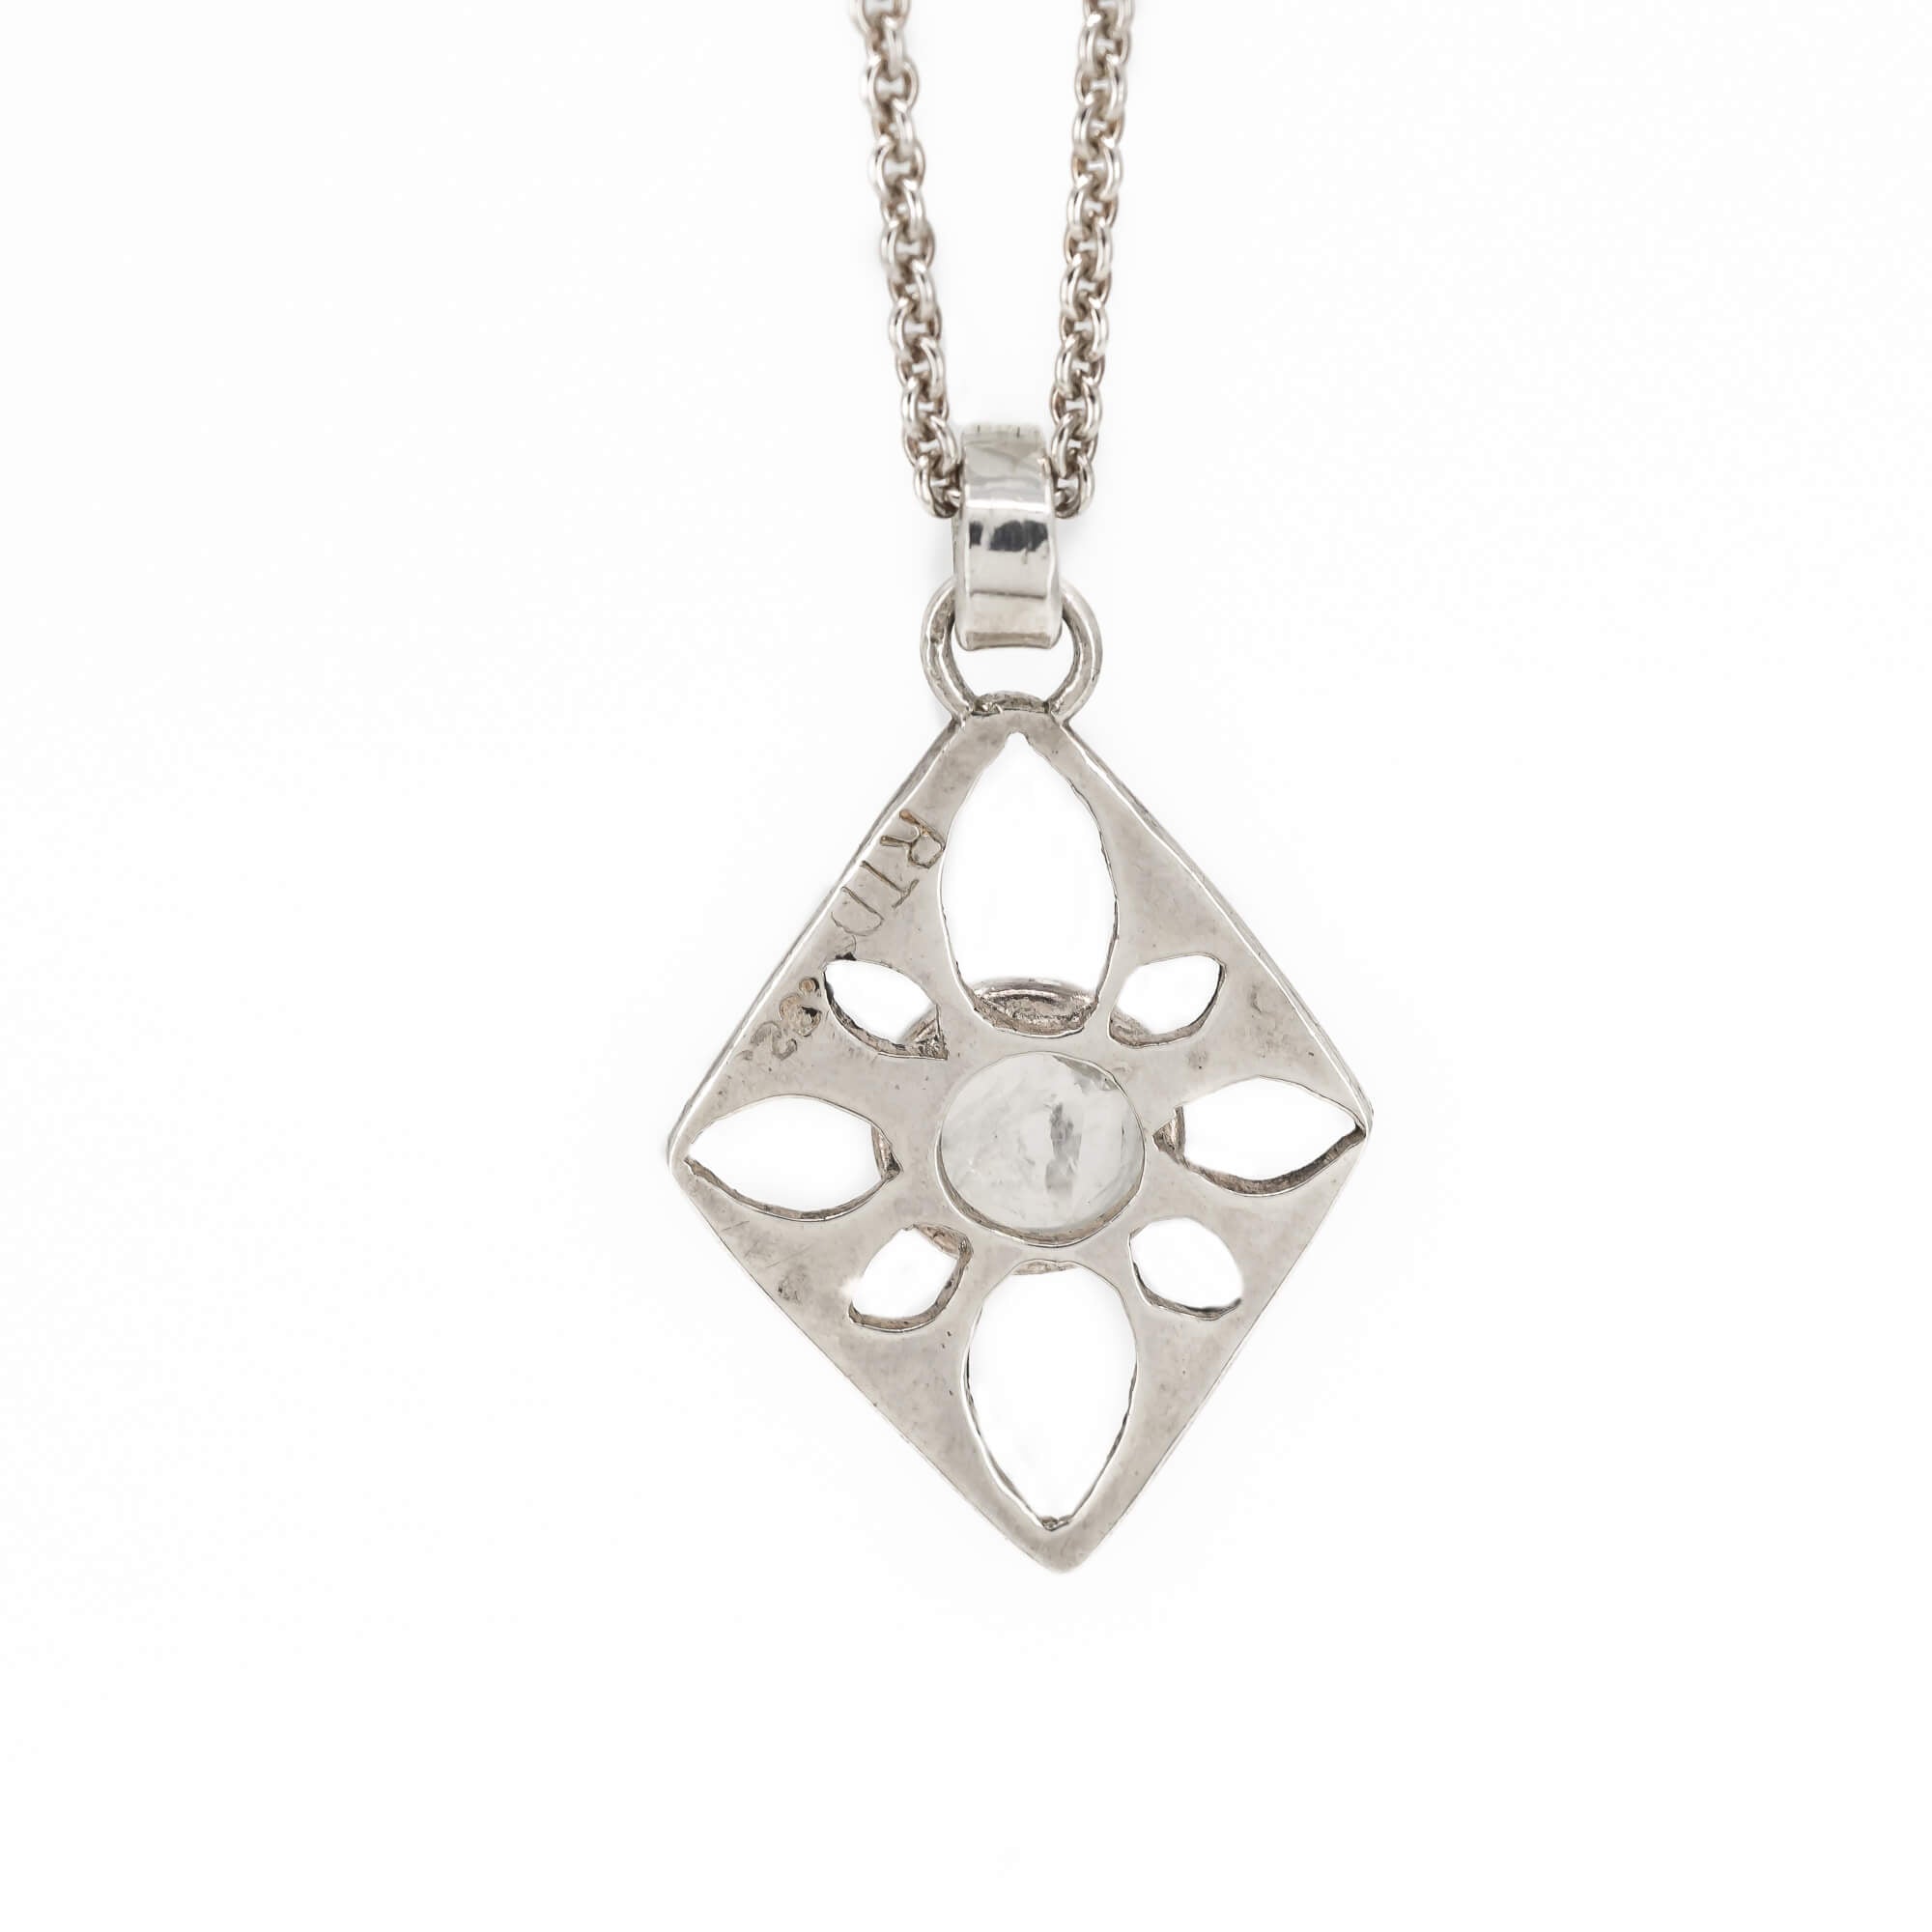 Moonstone pendant necklace in sterling silver